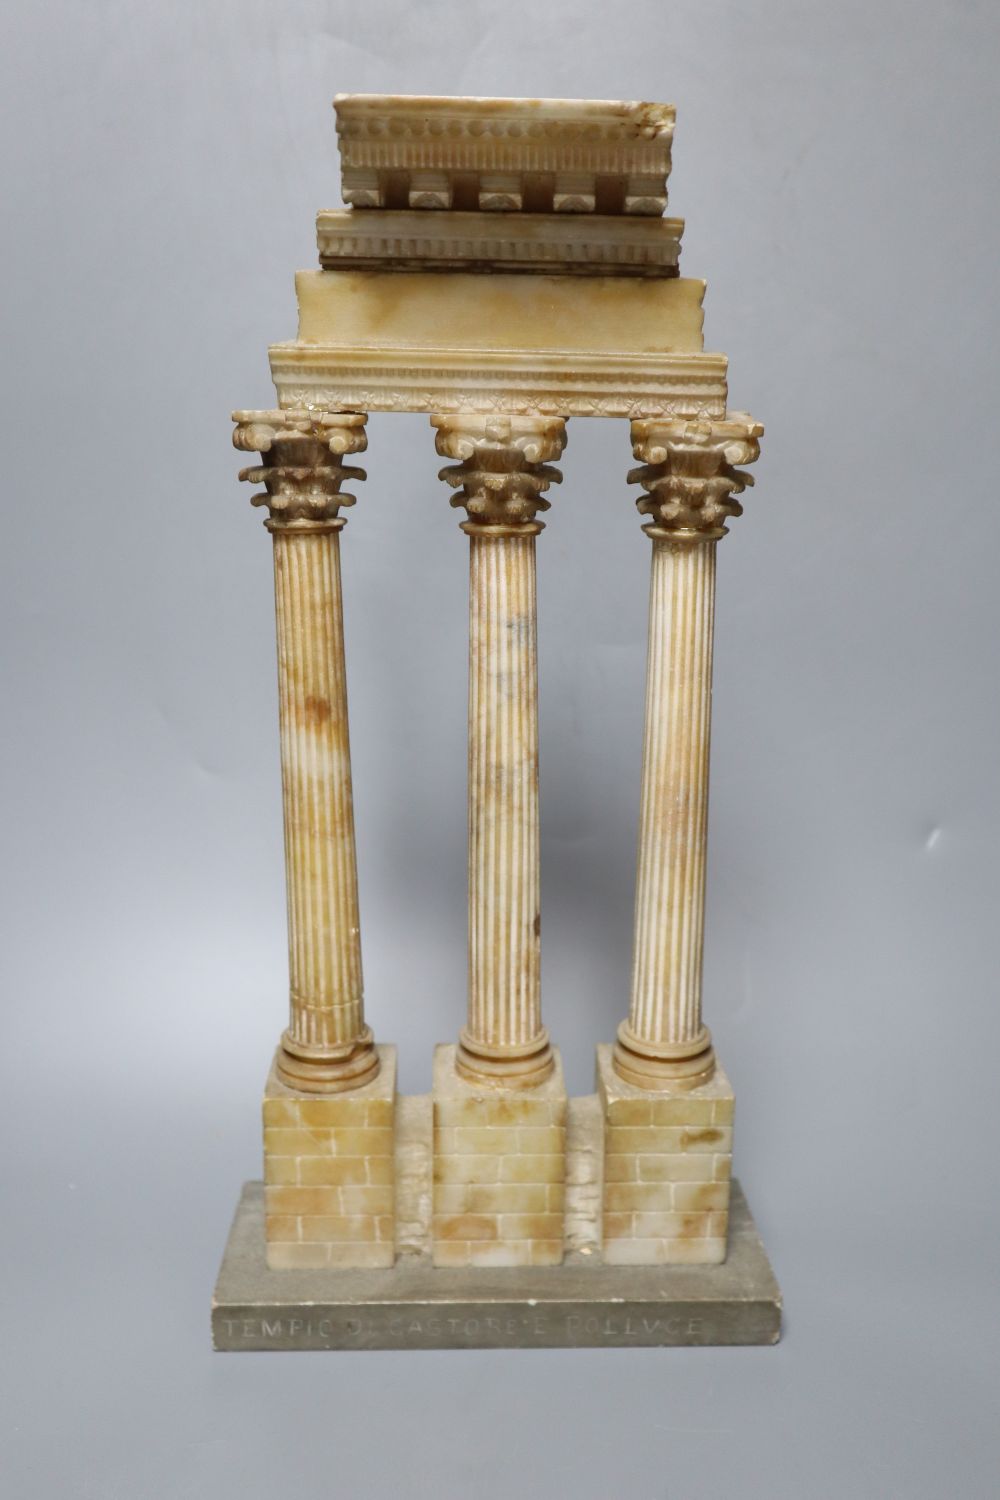 After the Antique. A Grand Tour carved and stained alabaster model of Ruins, height 34cm